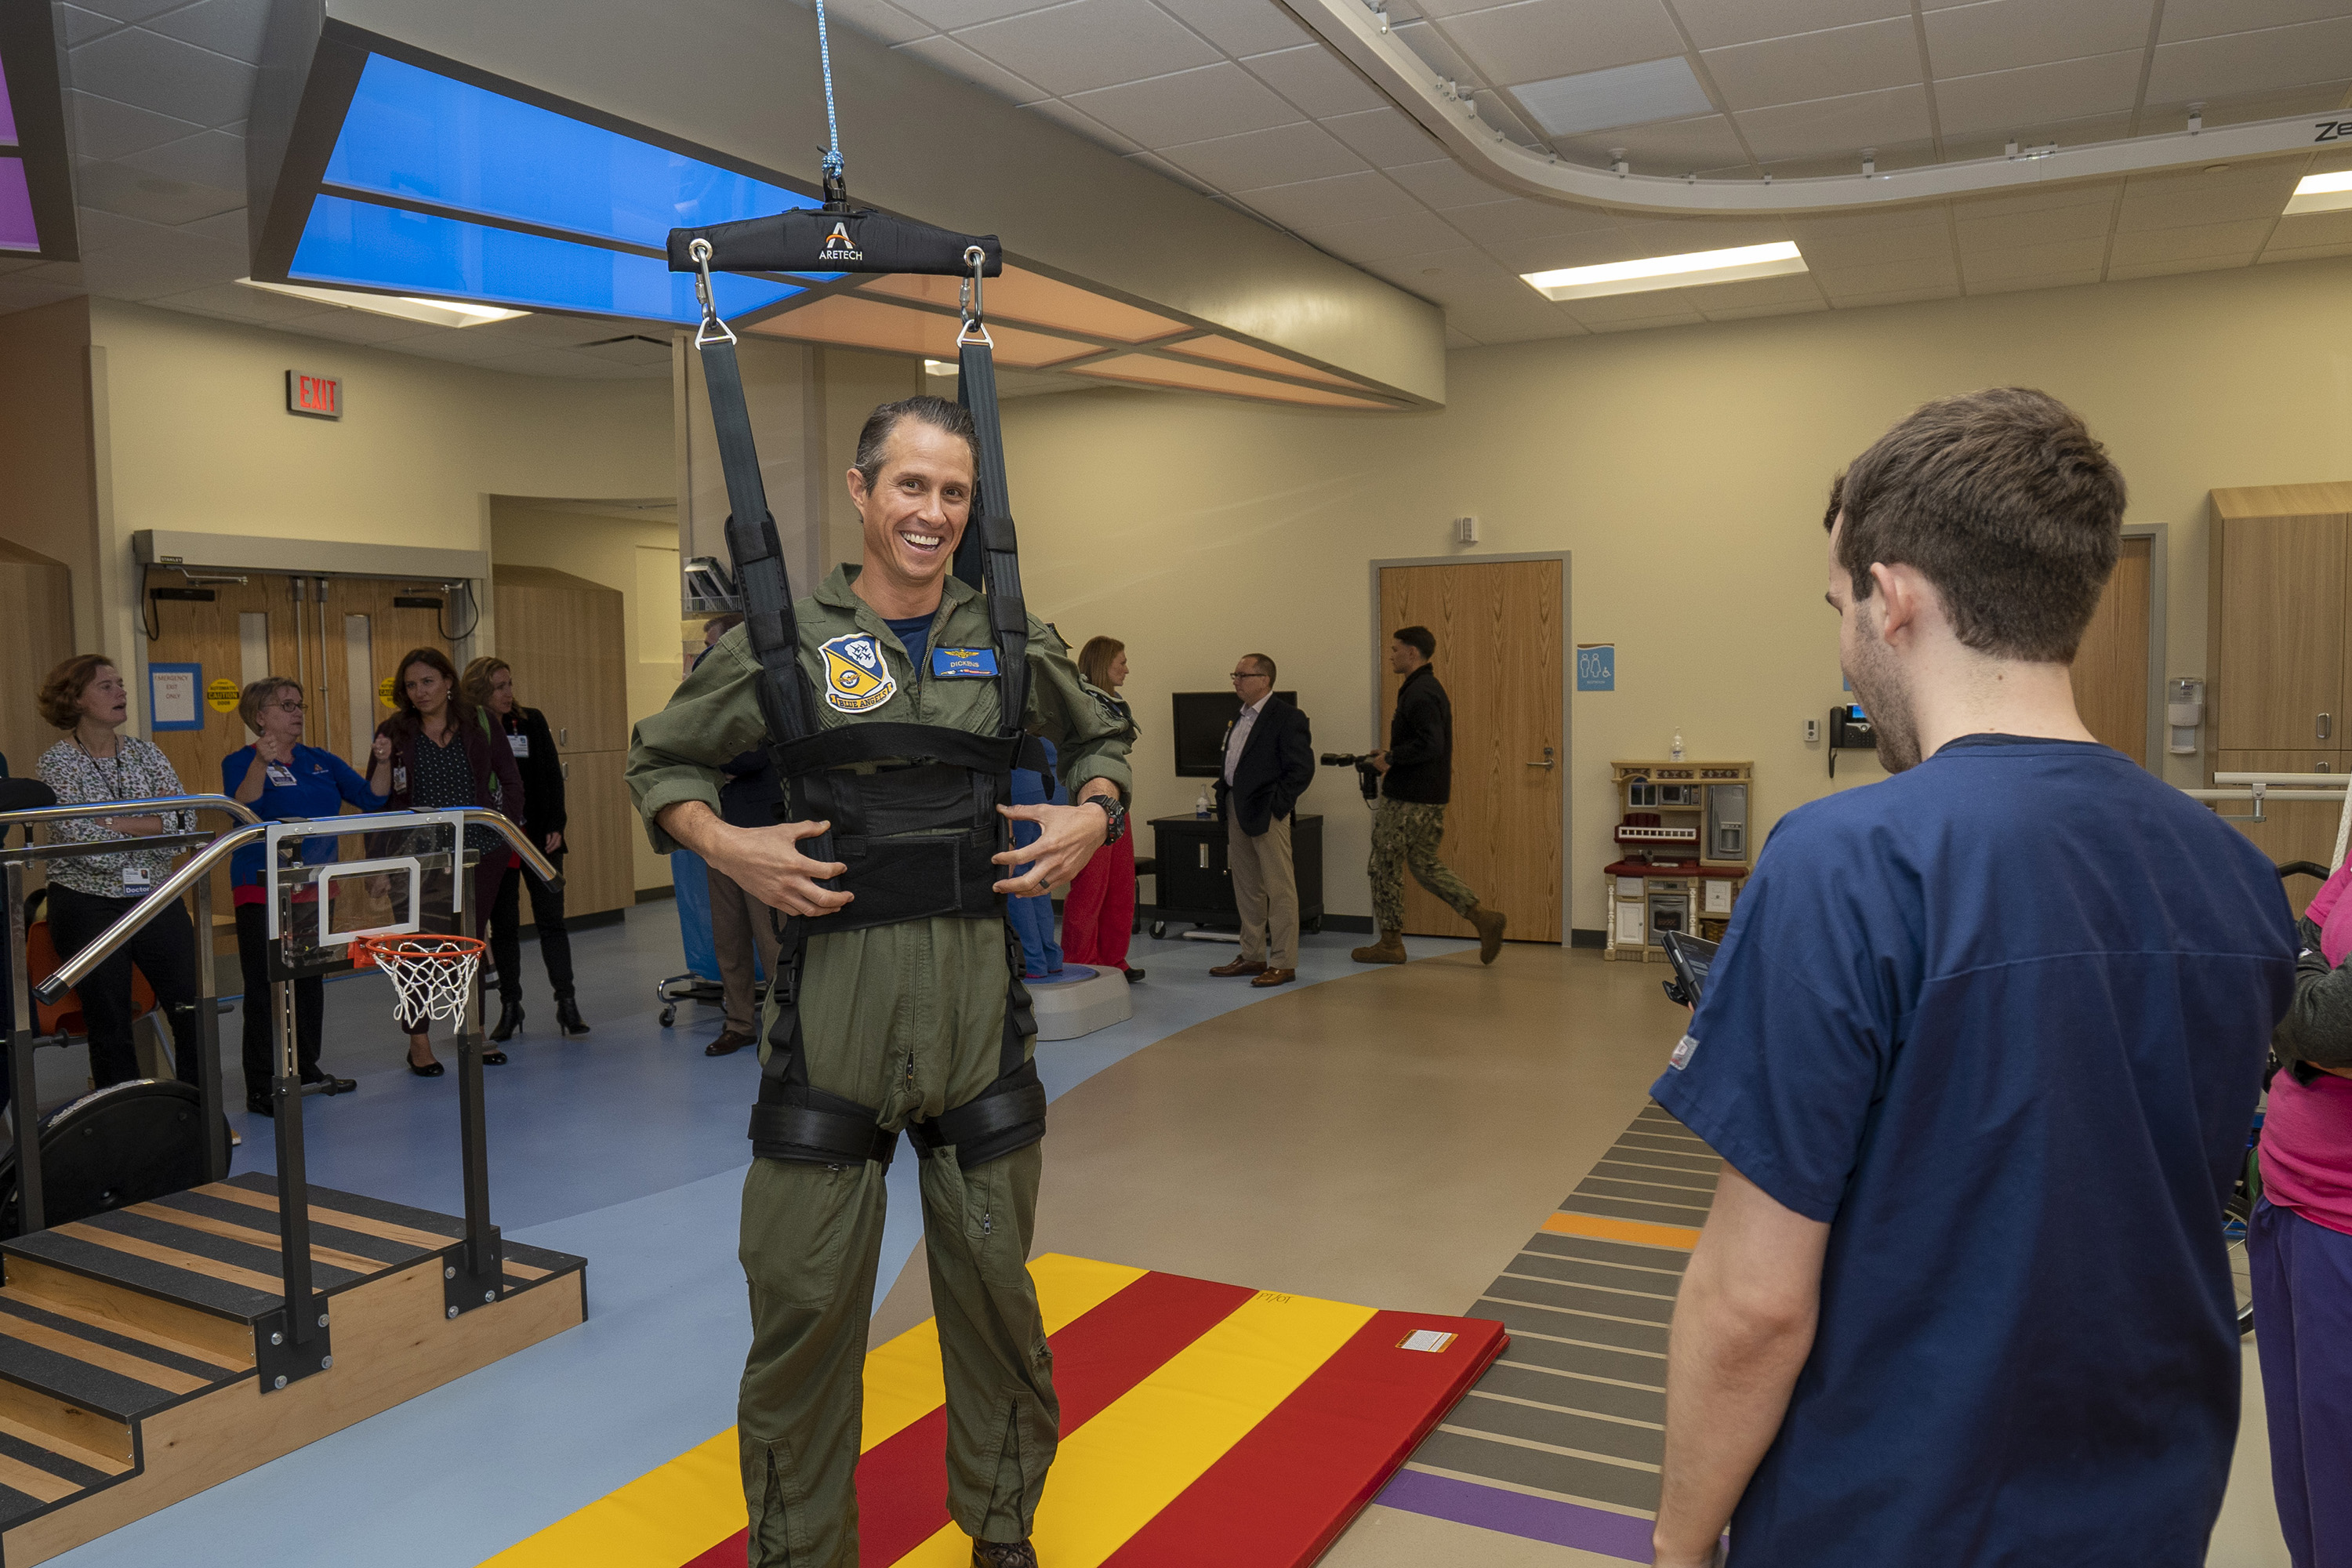 U.S. Navy Lt. Cmdr. Matt Suyderhoud, a former Blue Angel, demonstrates ZeroG technology during the grand opening of a newly renovated rehab unit at Children's Hospital of The King's Daughters.